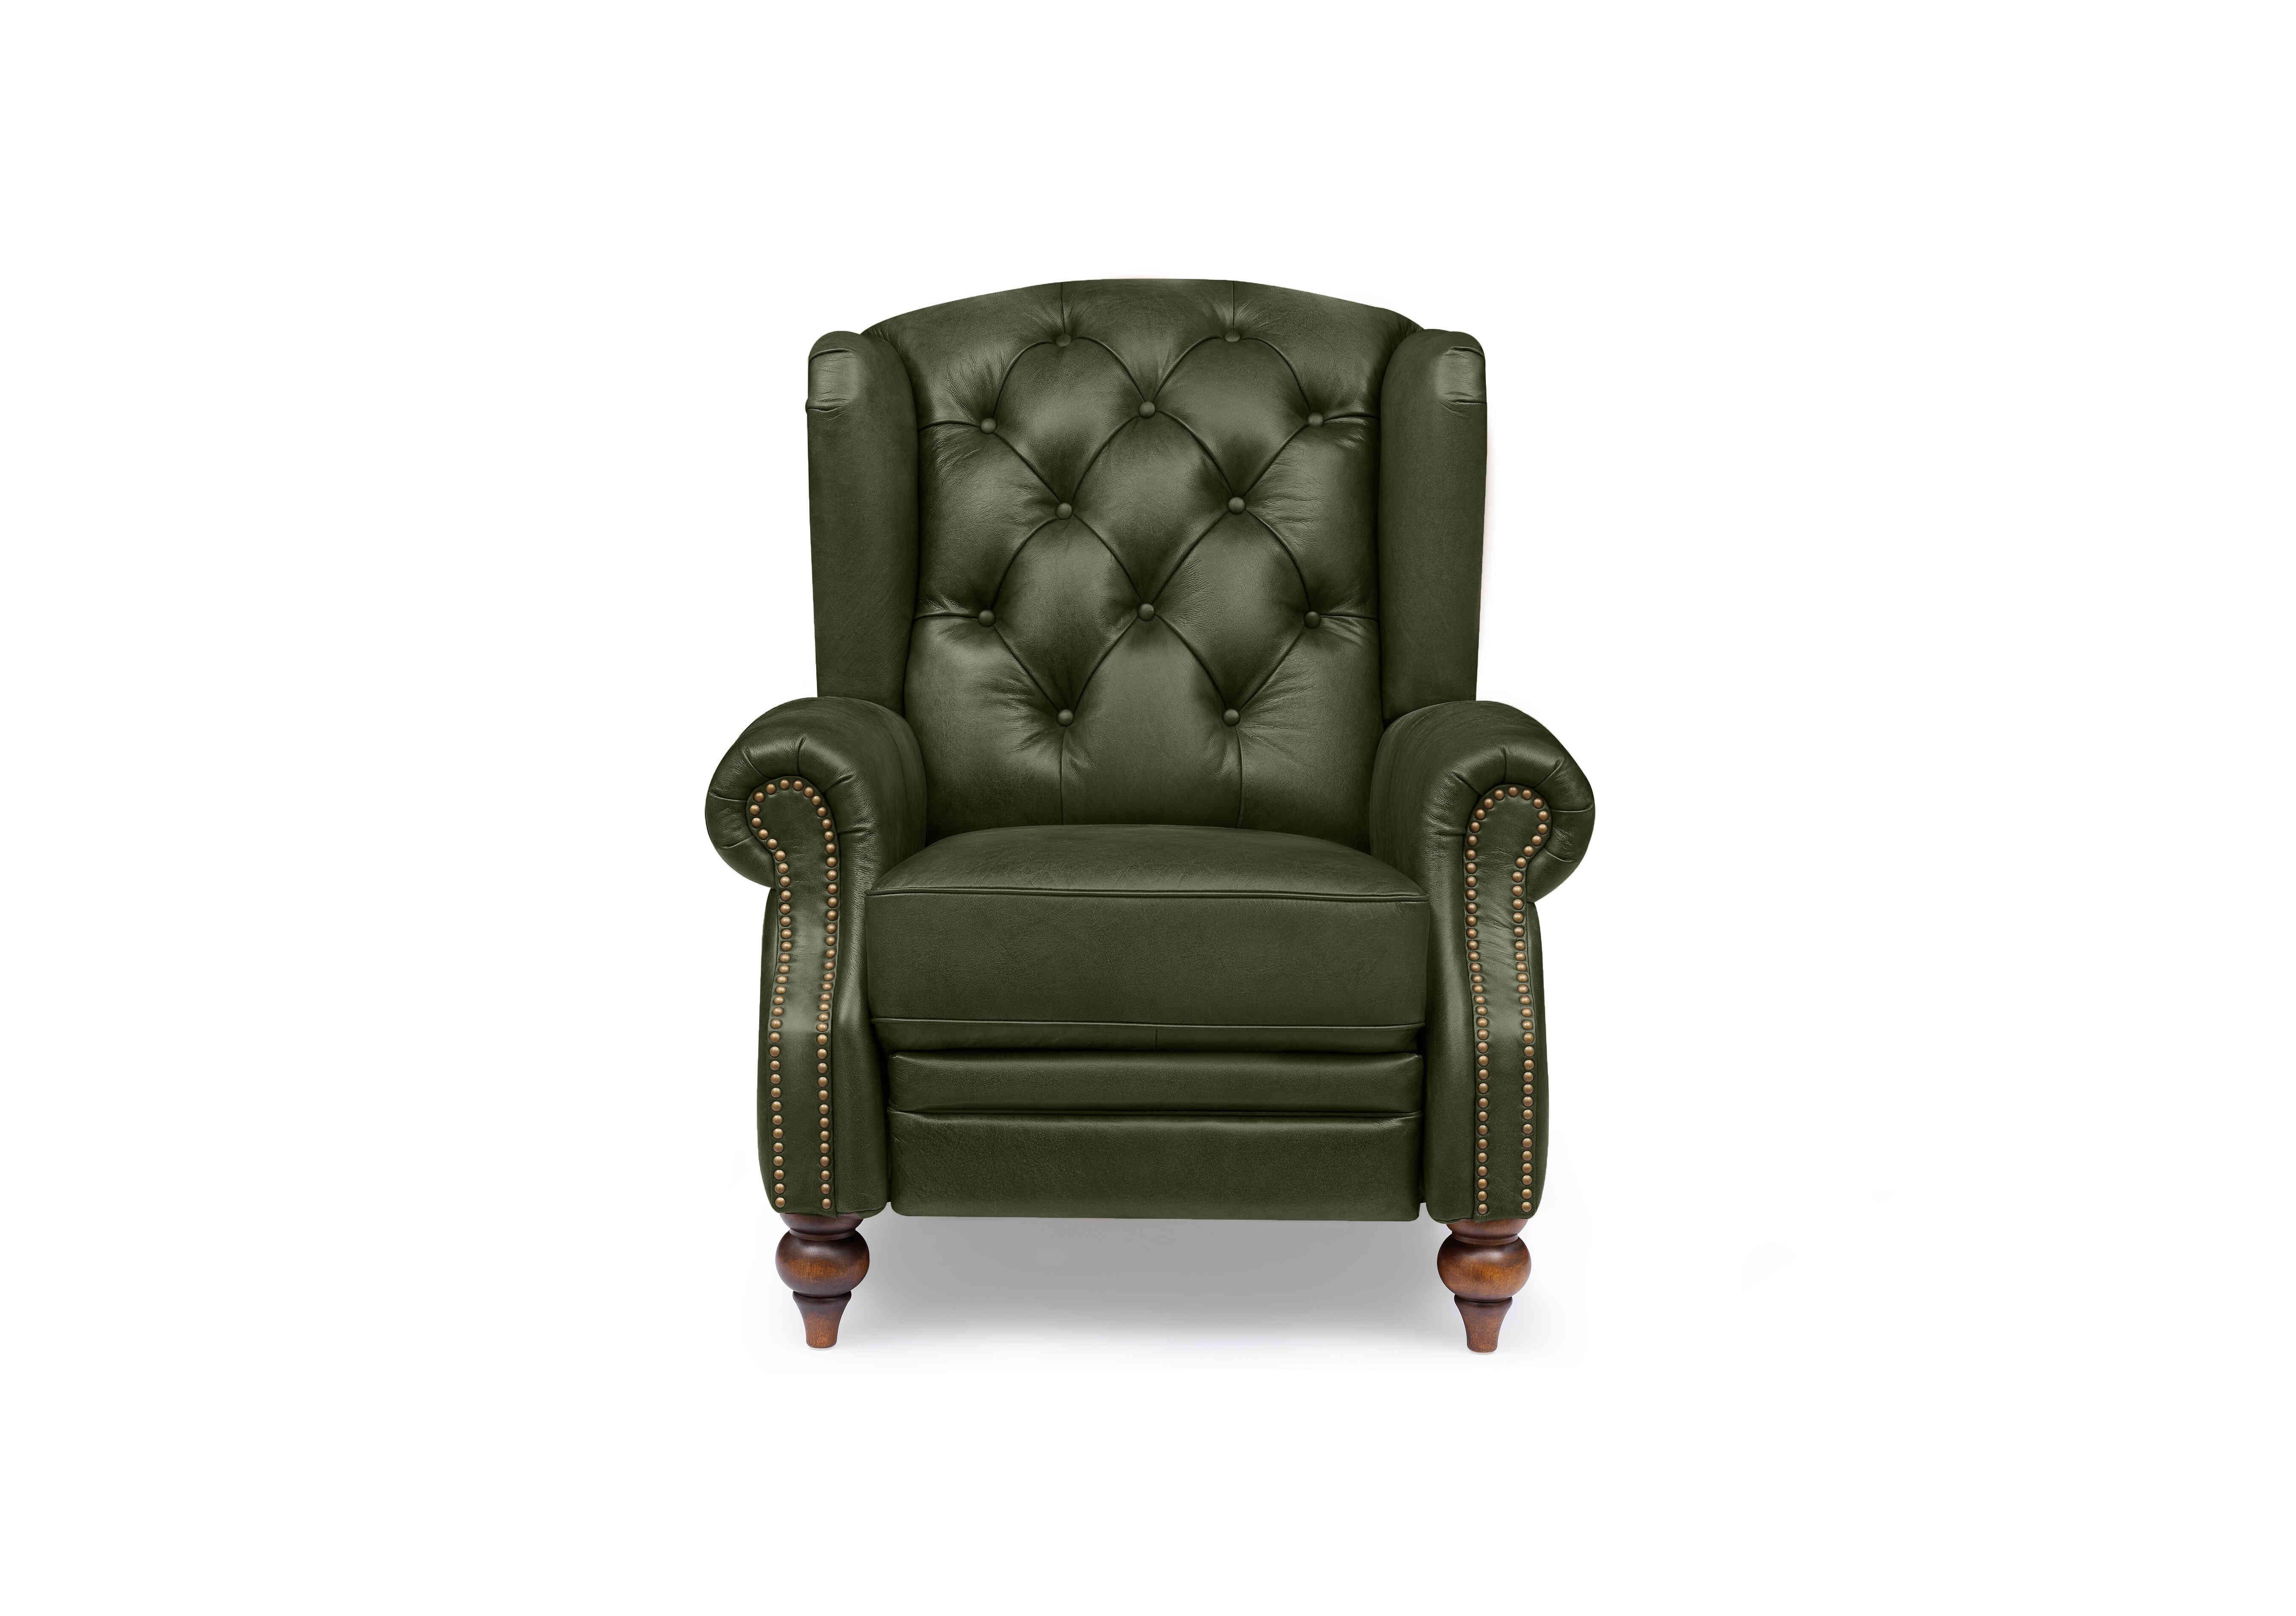 Shackleton Leather Power Recliner Wing Chair in X3y1-1965ls Emerald on Furniture Village